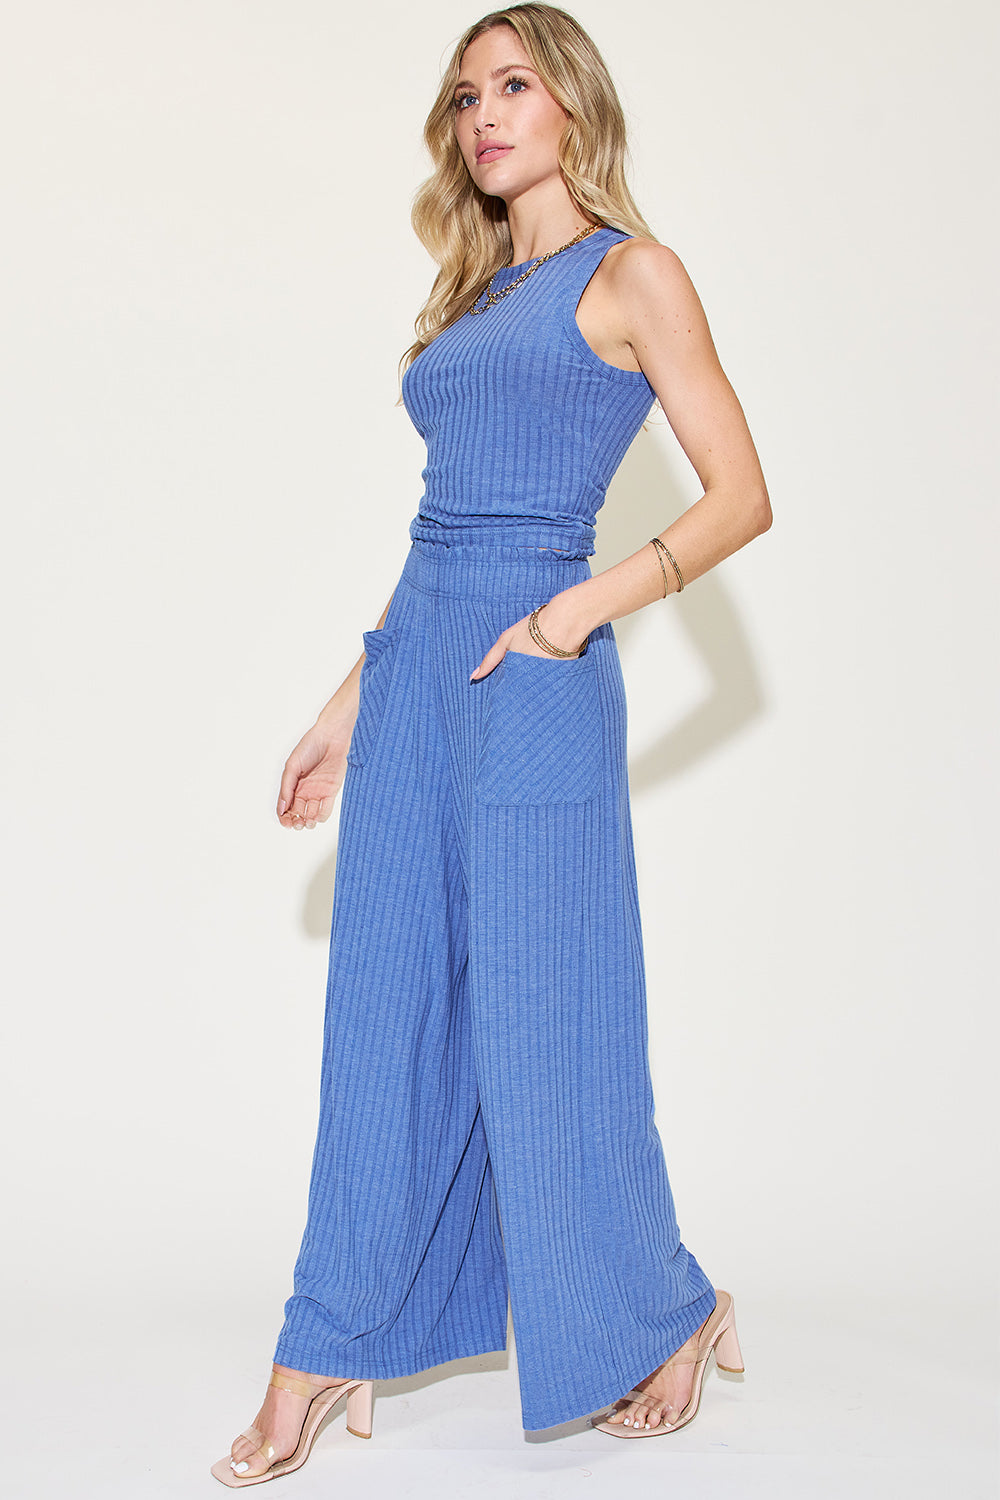 Basic Bae Full Size Ribbed Tank and Wide Leg Pants Set - Clothing Ensemble for All-Day Comfort